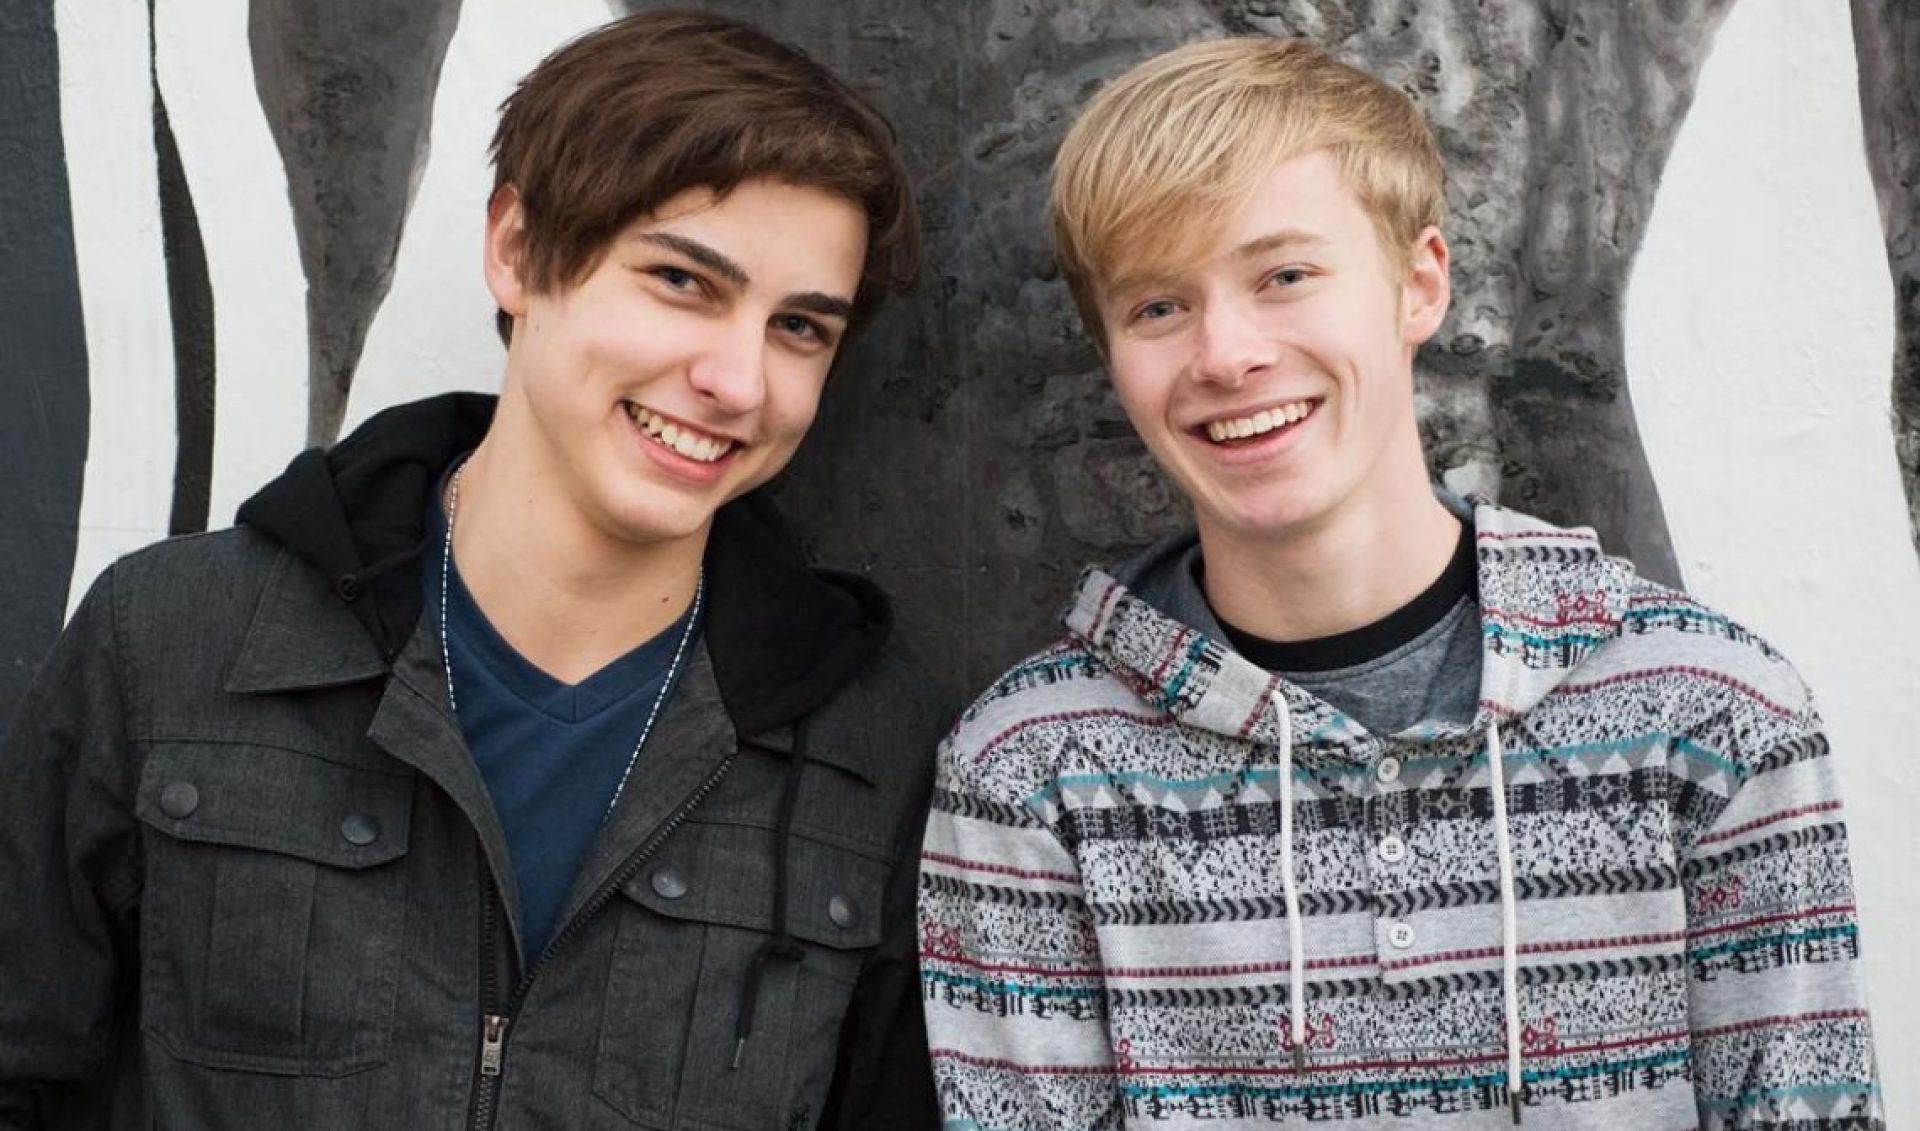 YouTube Millionaires: Sam And Colby Look To "Explore Everything" ...